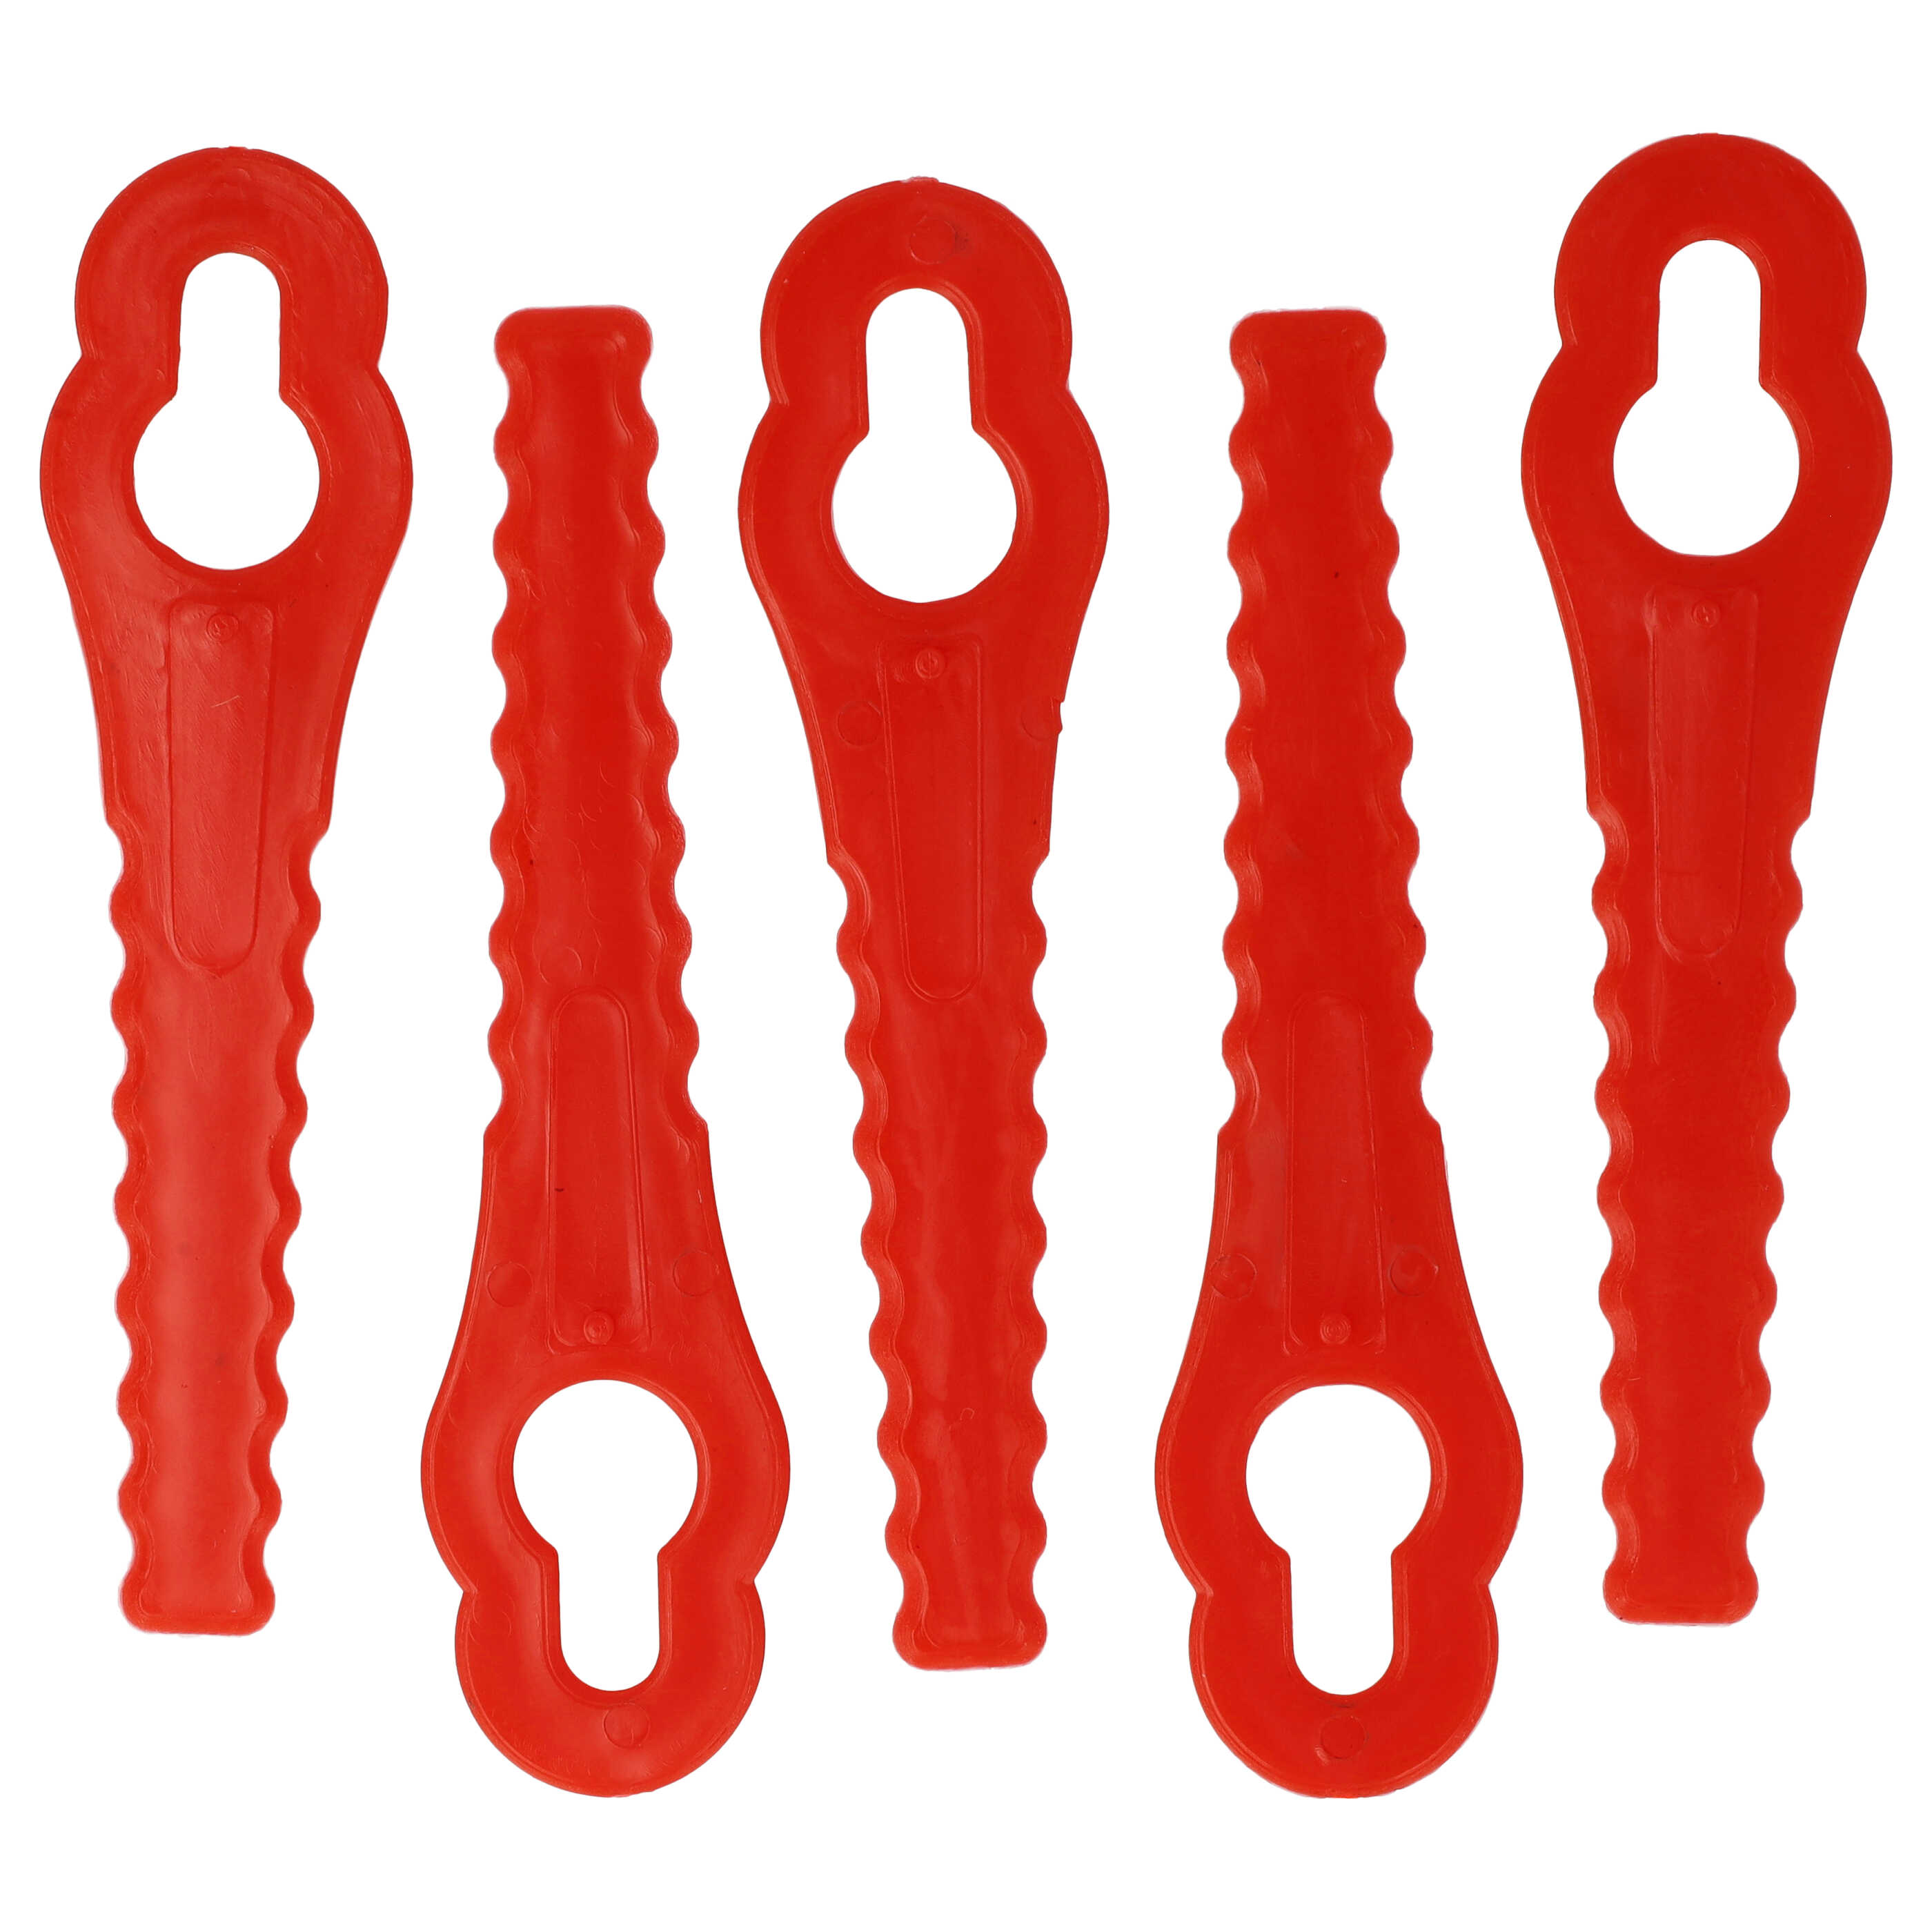 5x Exchange Blade replaces Güde 58586 for Cordless Strimmer - plastic, red